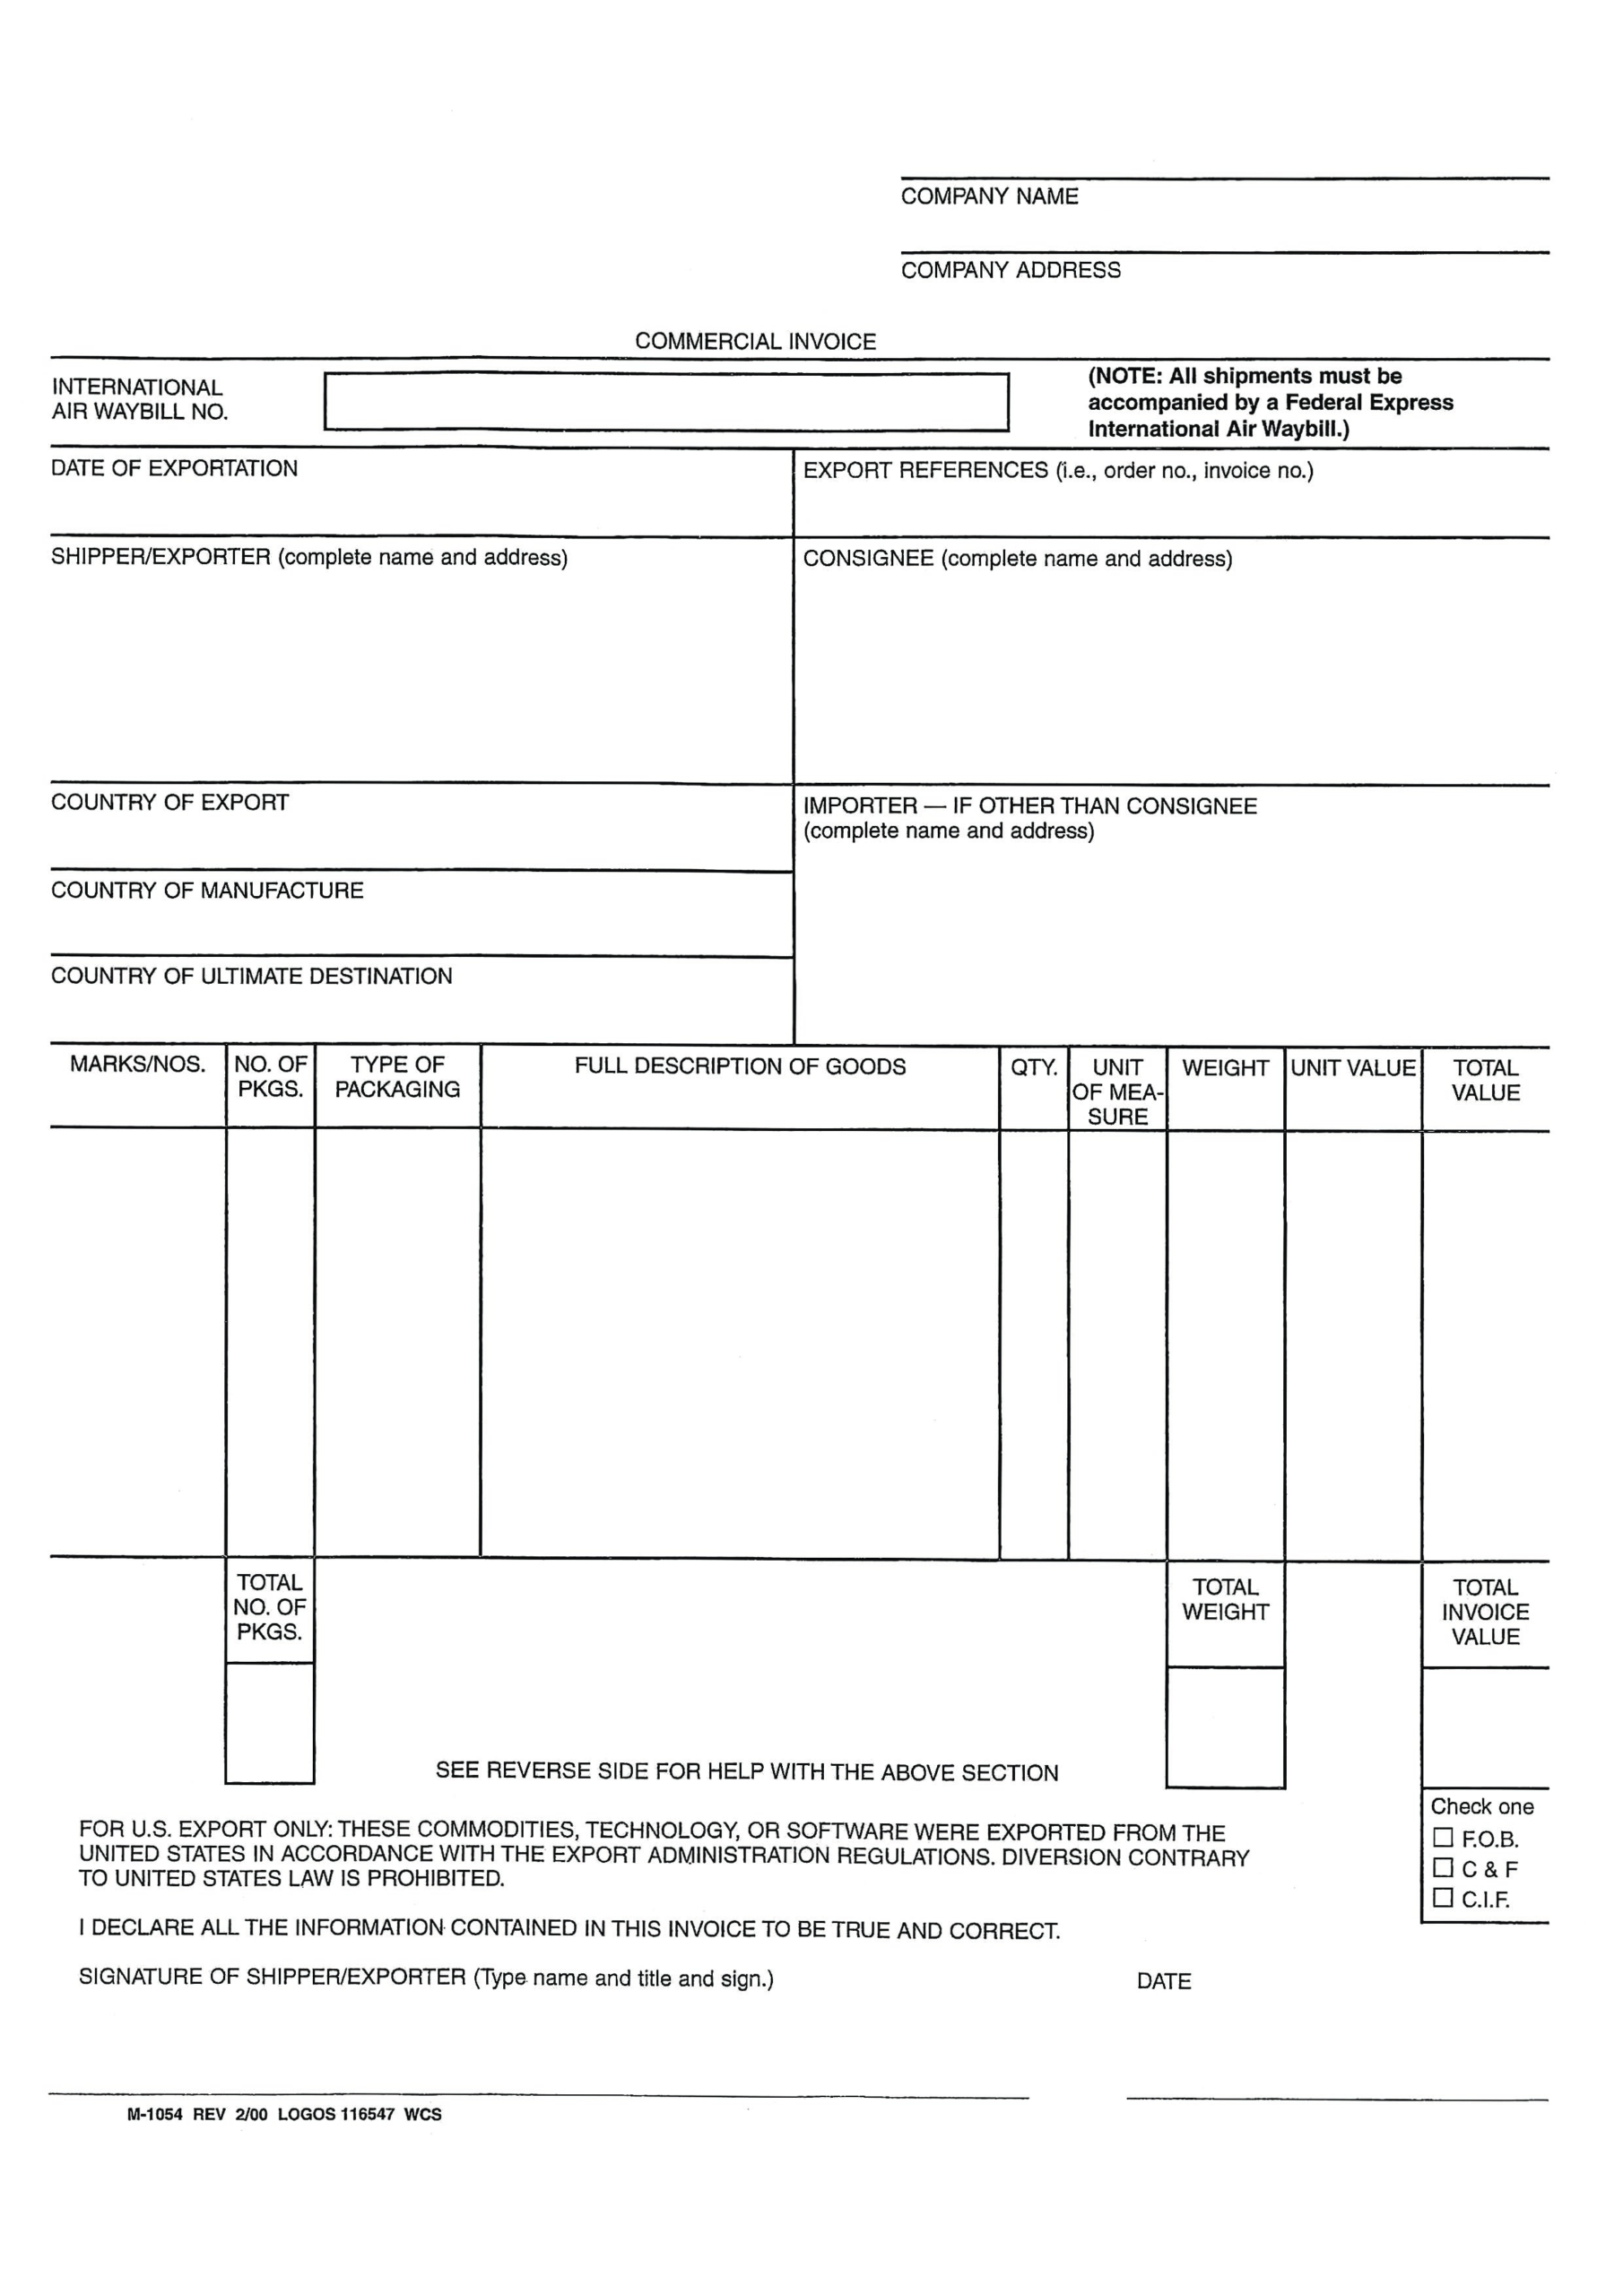 Blank Commercial Invoice Word | Templates At Throughout Commercial Invoice Template Word Doc